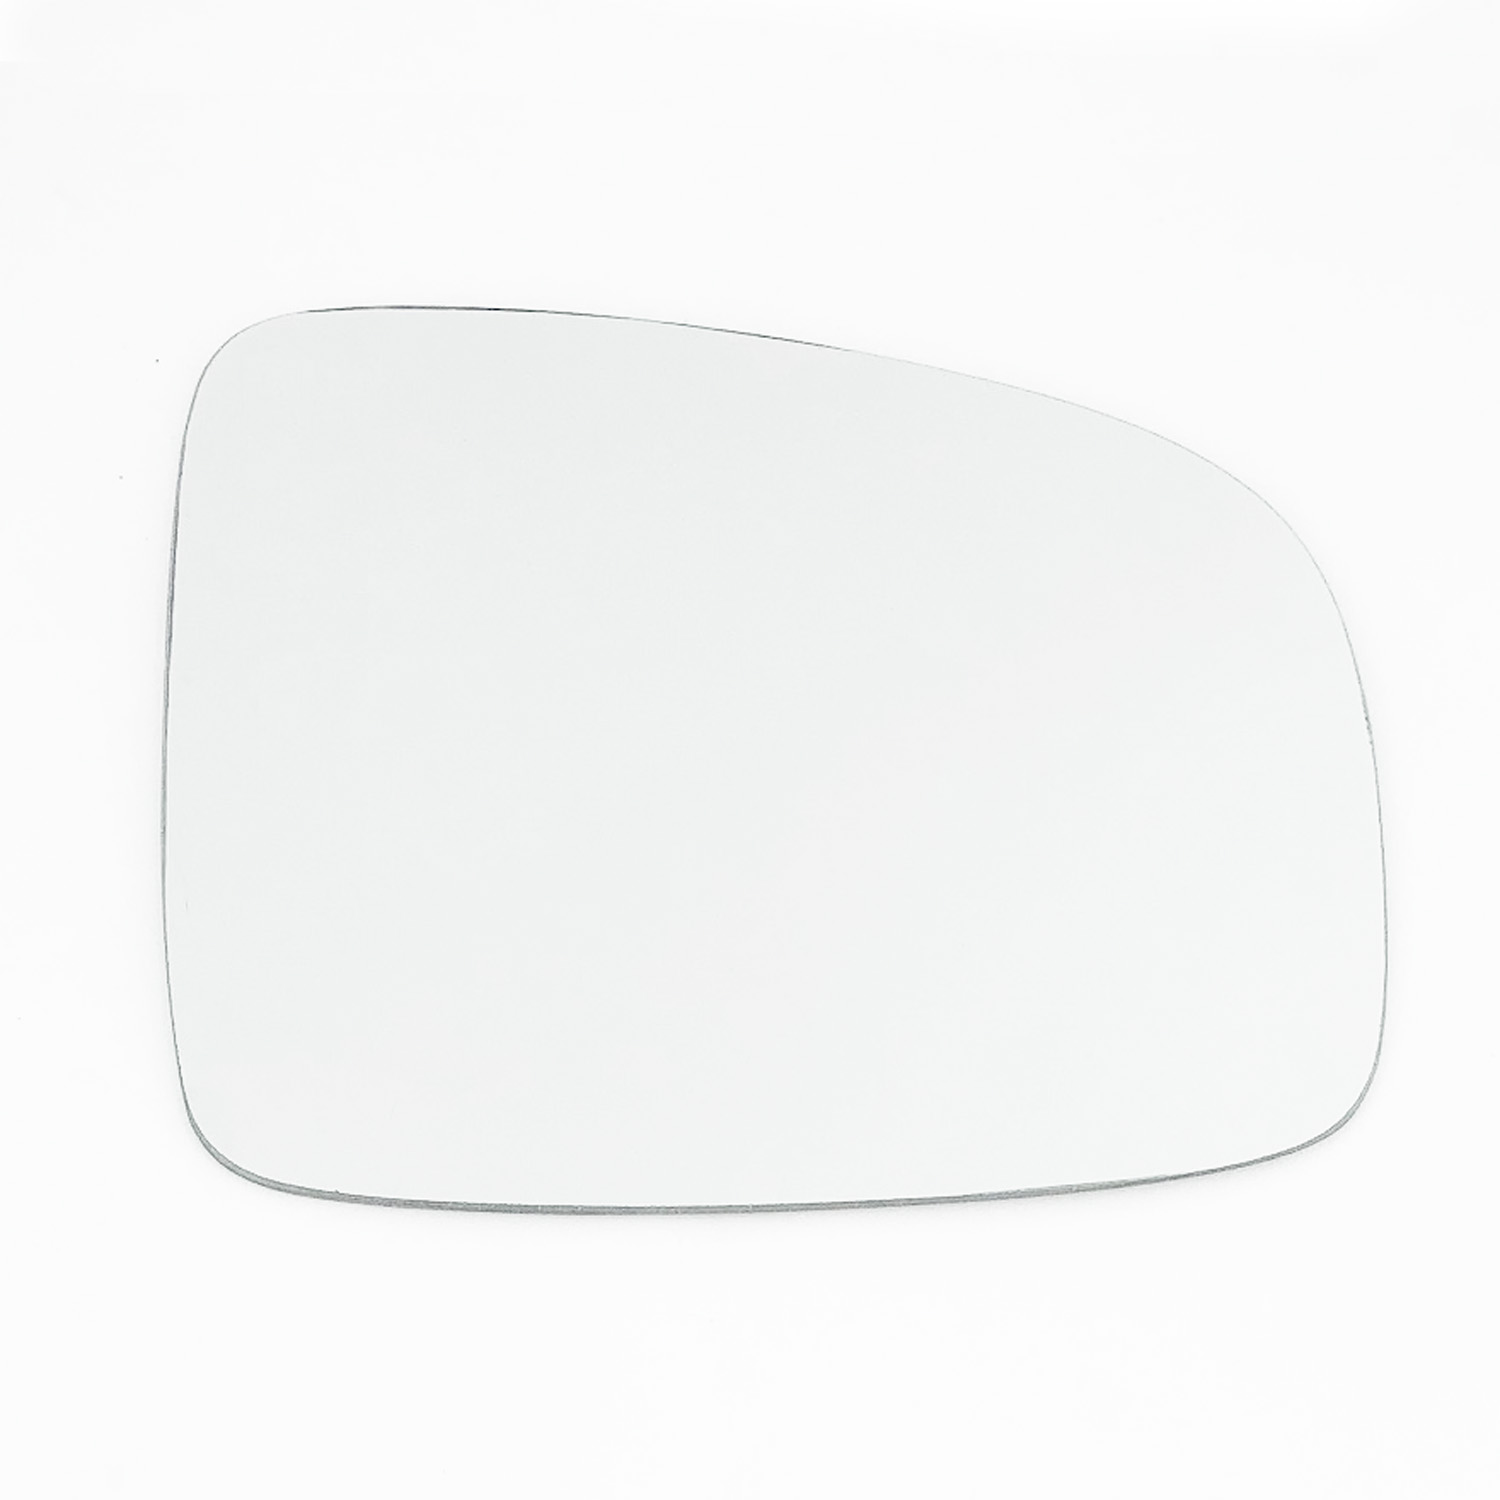 Honda Jazz Wing Mirror Glass RIGHT HAND ( UK Driver Side ) 2016 to 2020 – Convex Wing Mirror